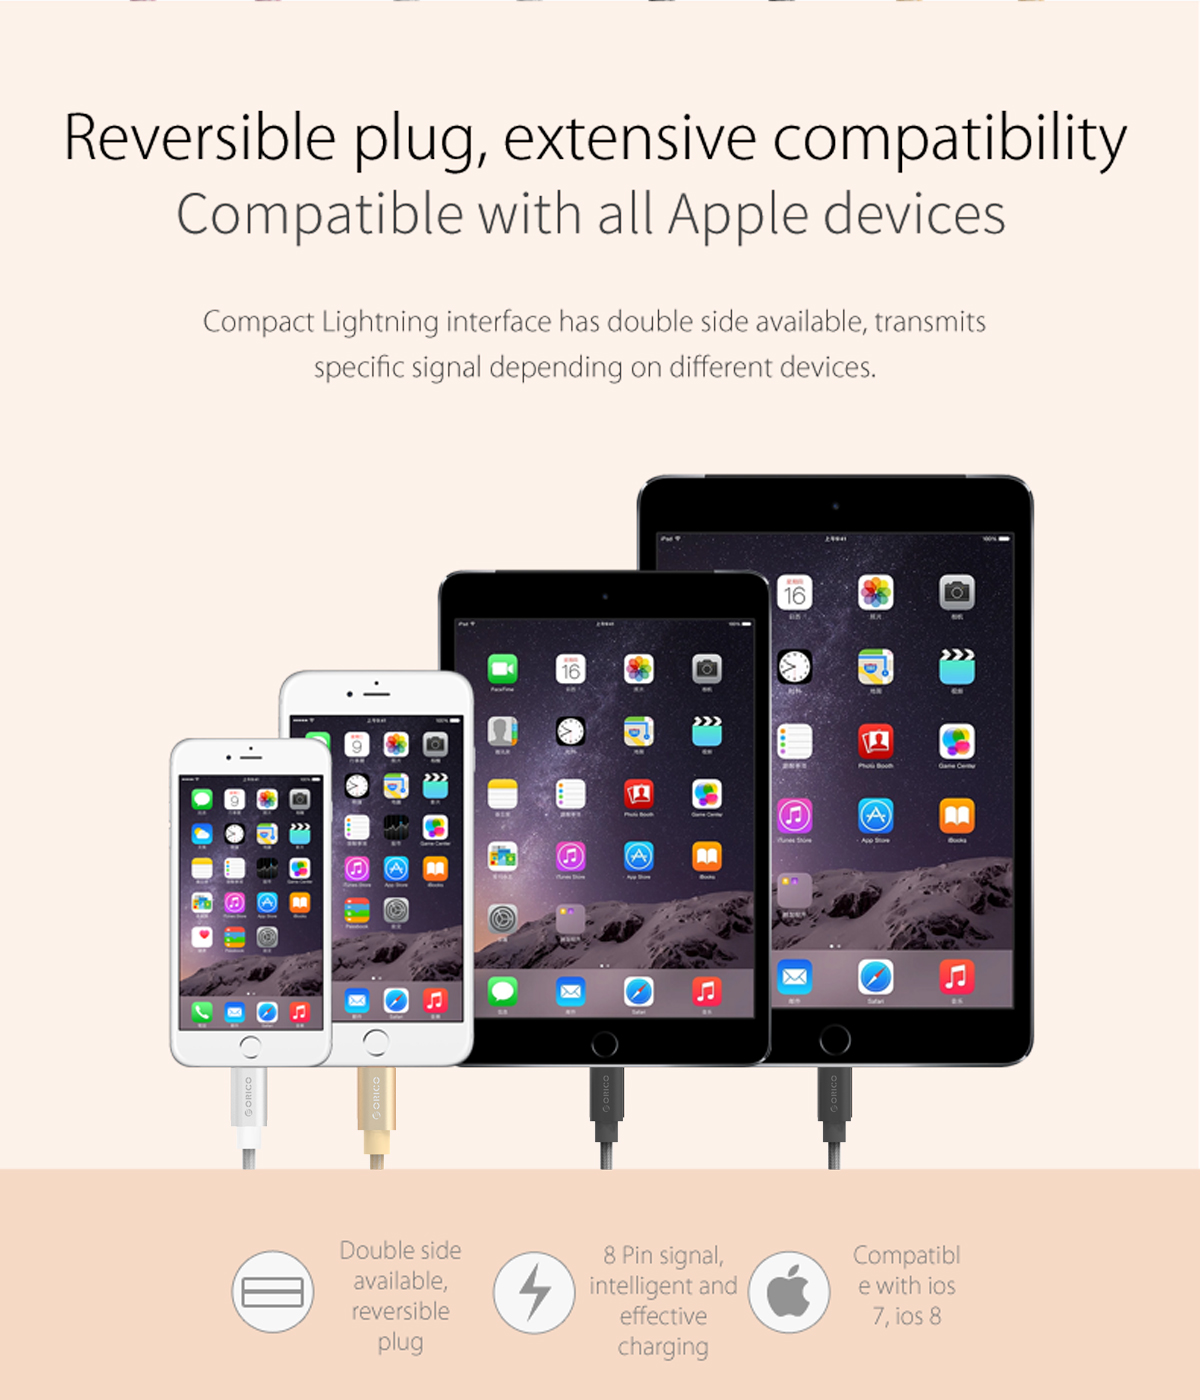 reversible plug and extensive compatibility